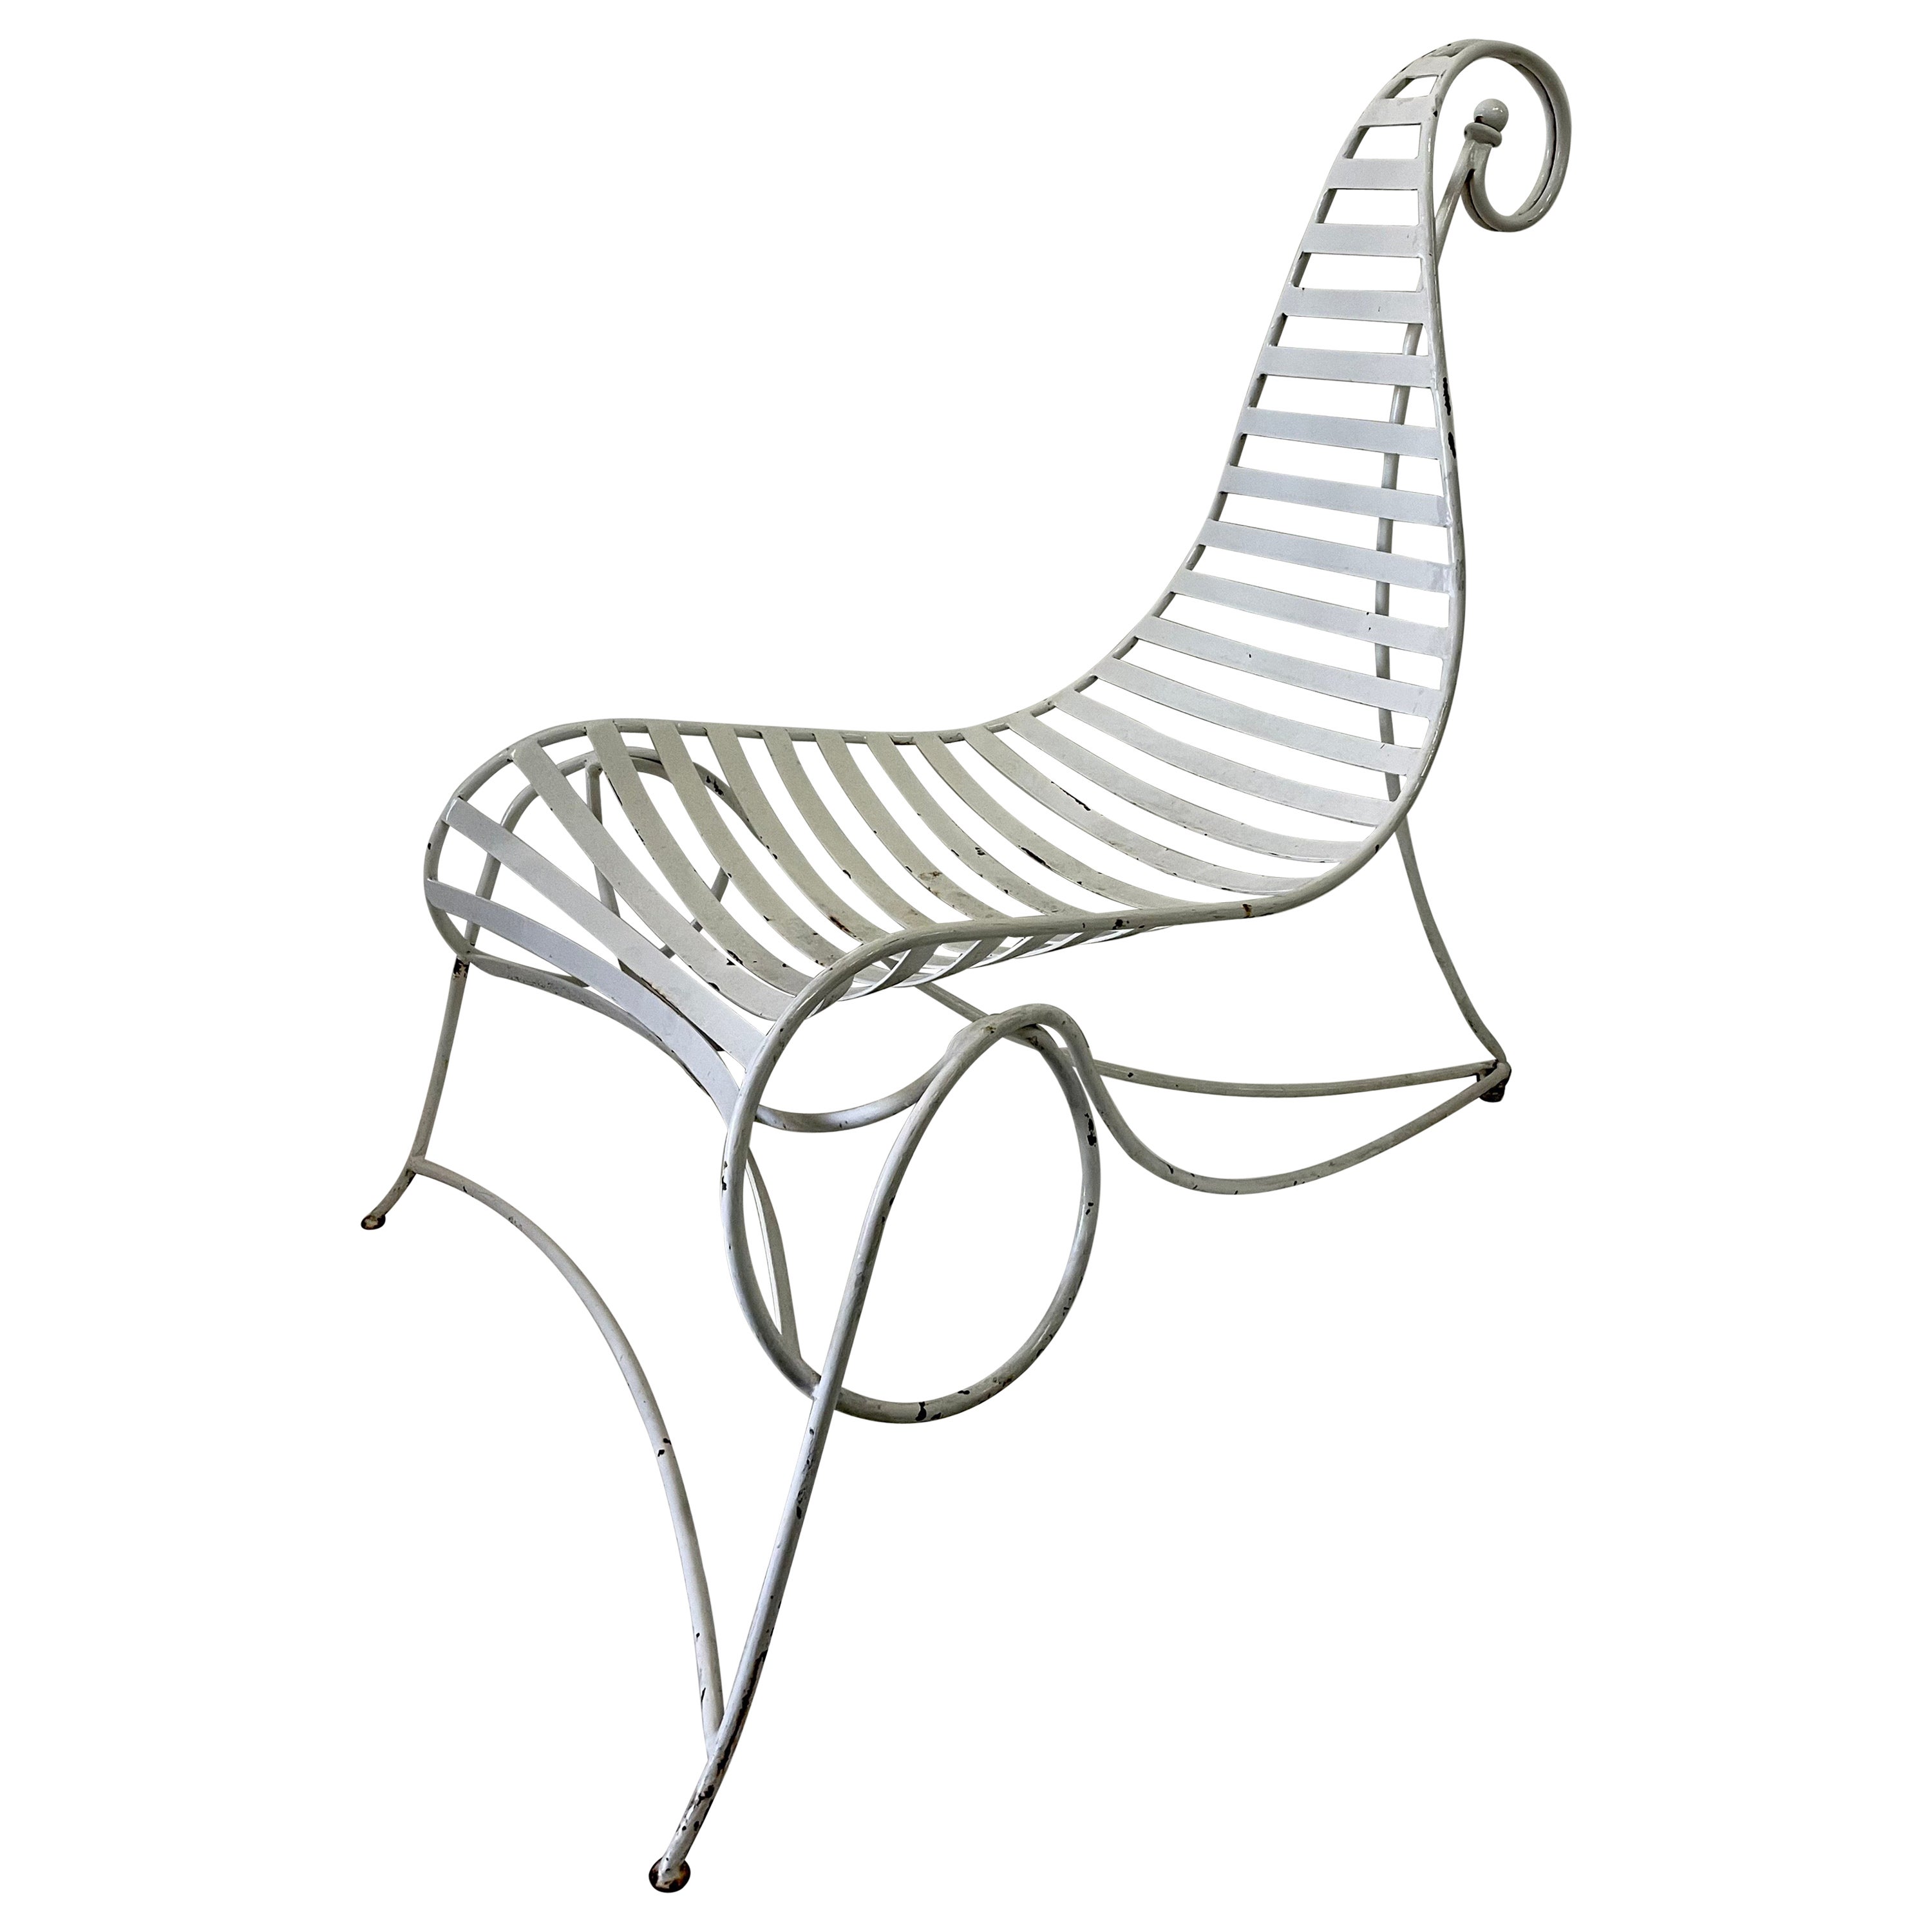 The Chair in the Style of the Spine Chair after André Dubreuil